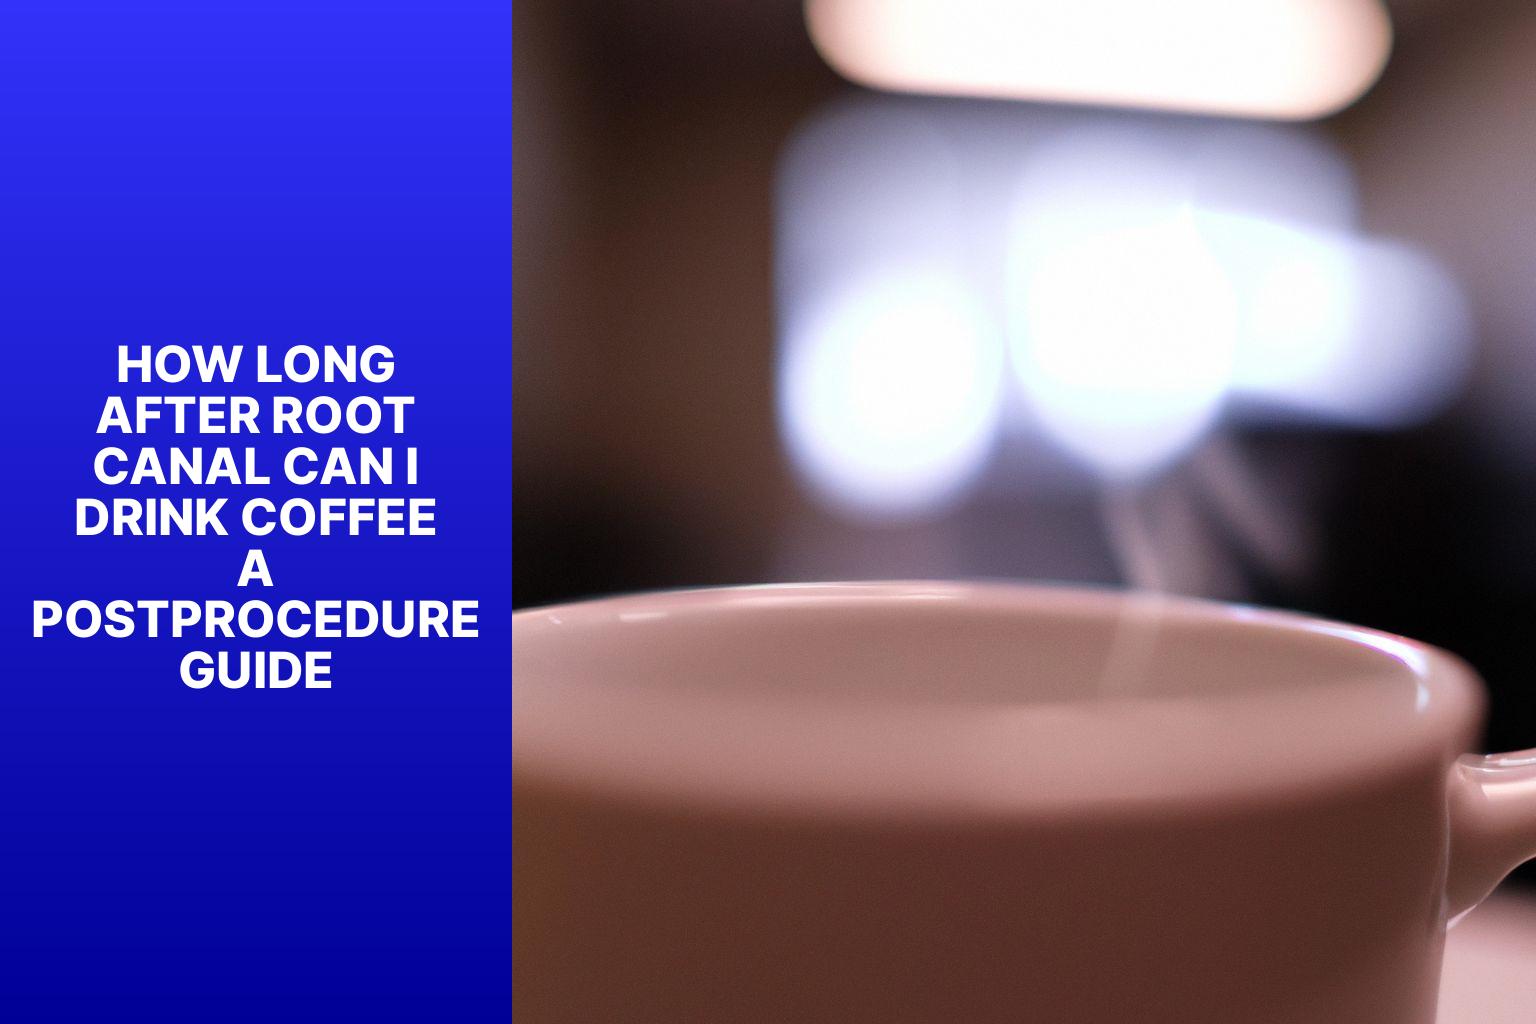 How Long After Root Canal Can I Drink Coffee? A Post-Procedure Guide